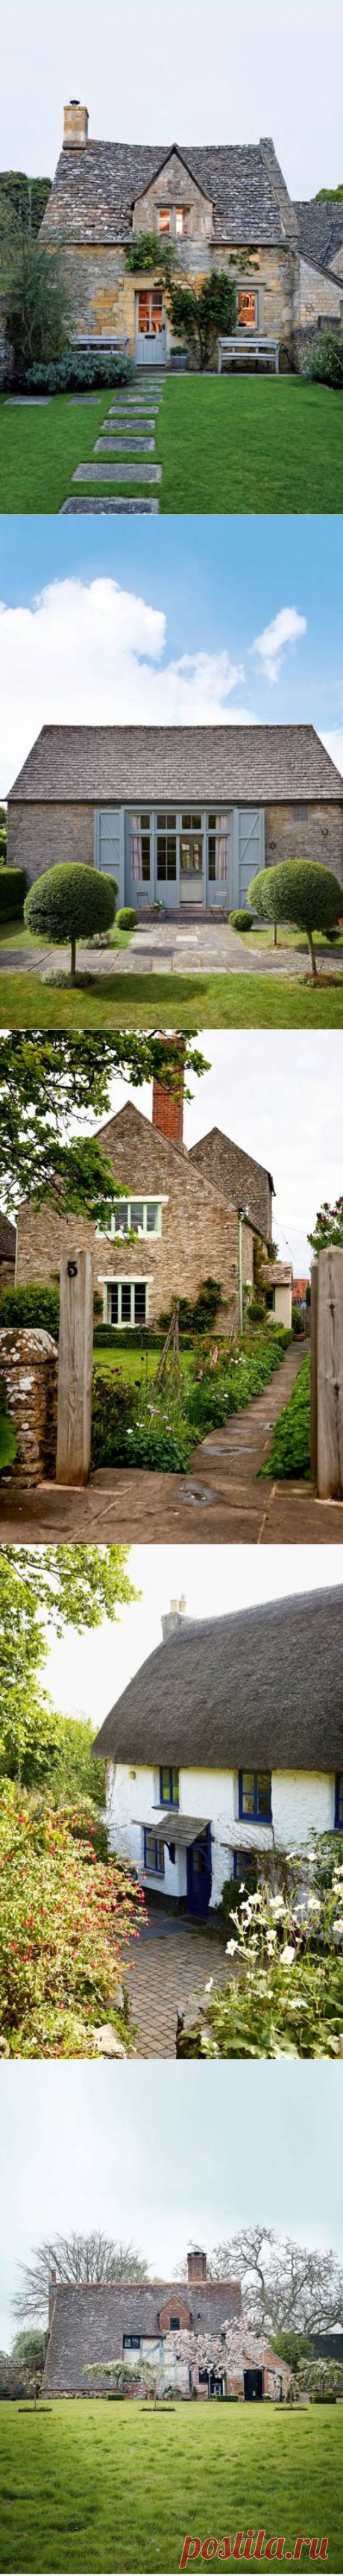 Country Cottage Decoration UK | House & Garden